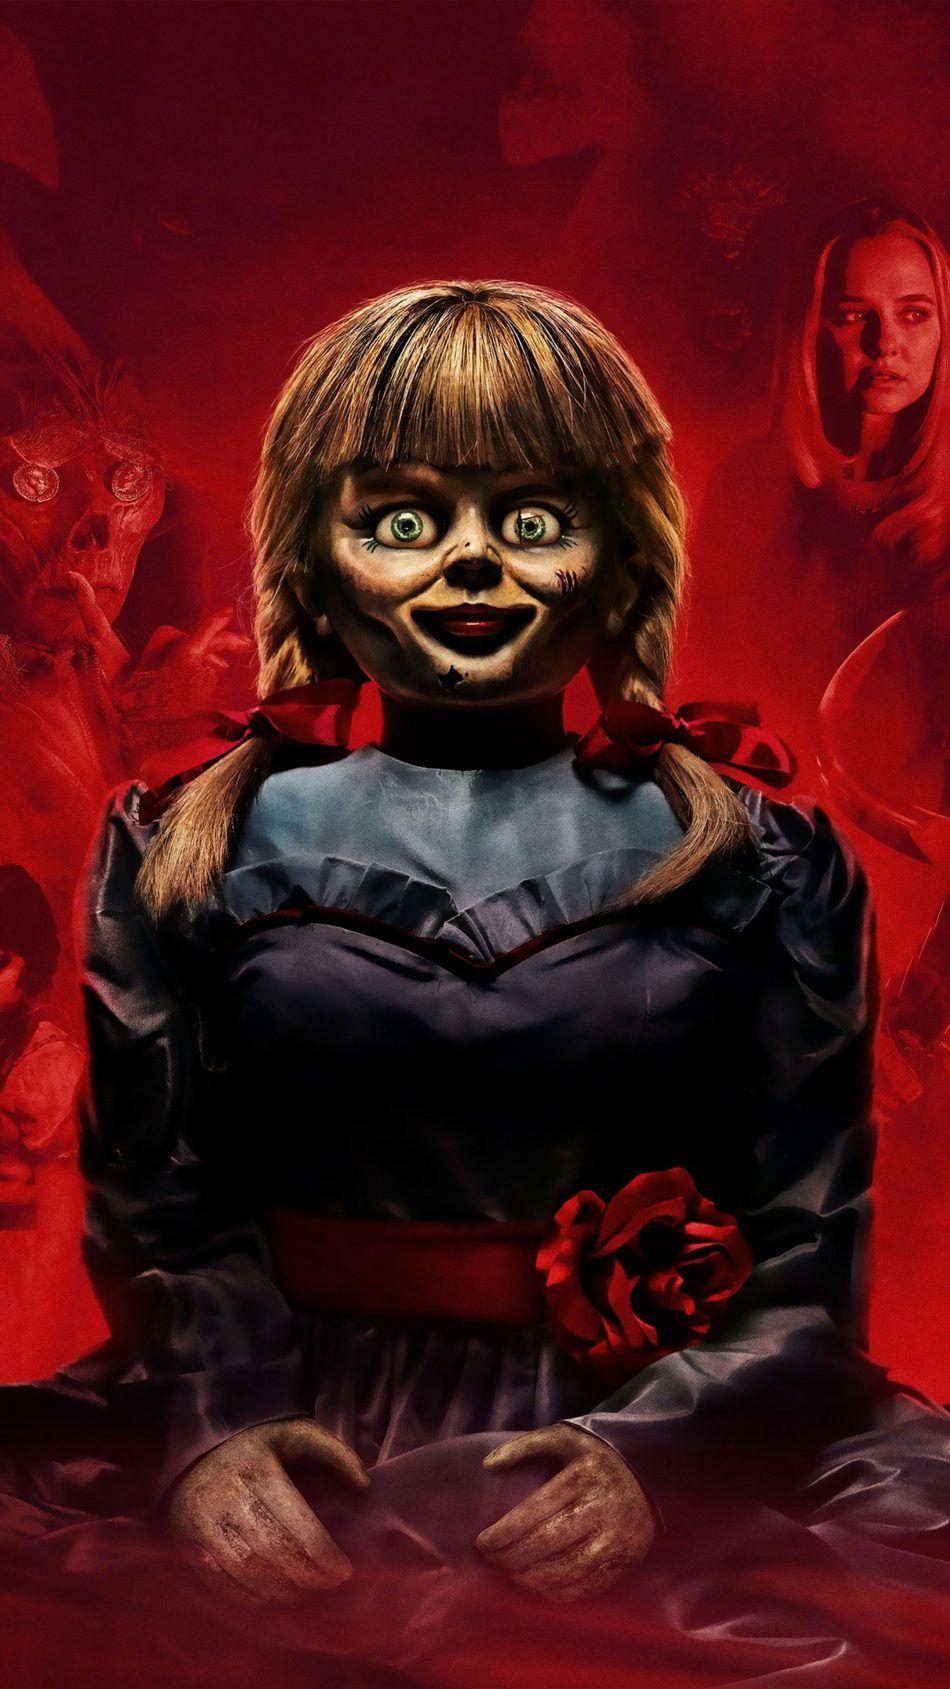 Annabelle Doll Comes Home 2019. Horror wallpaper hd, Scary